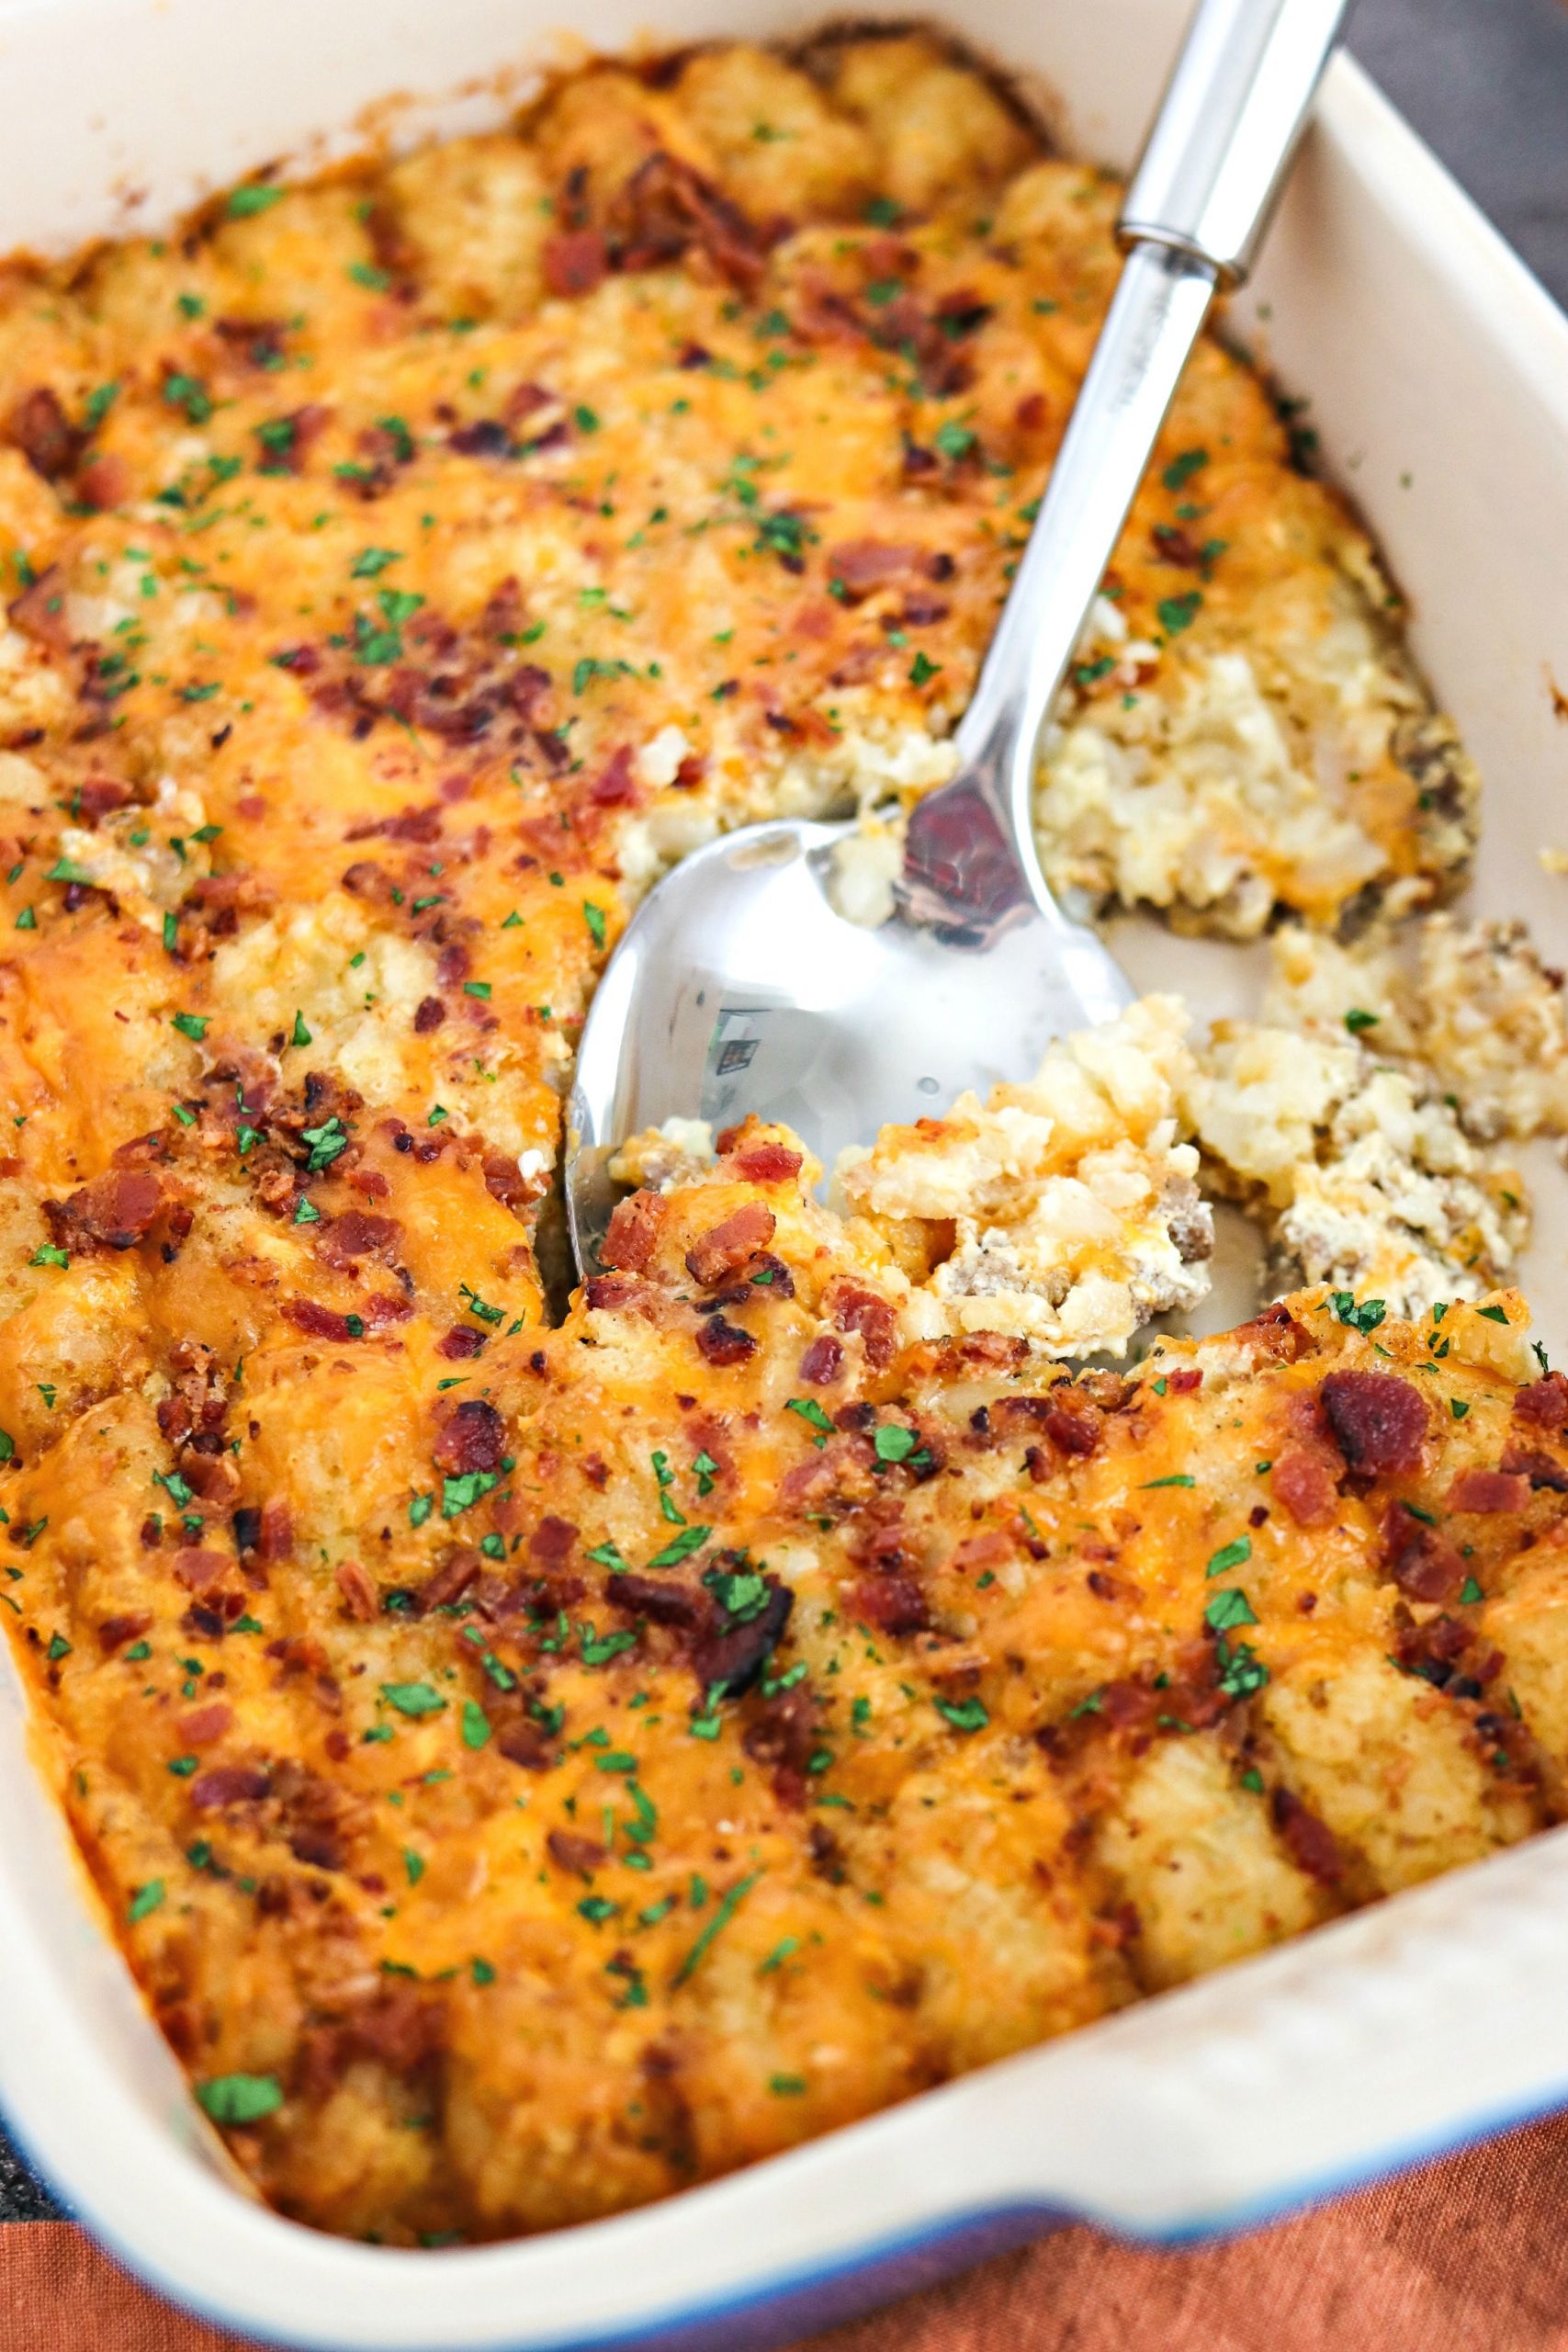 Breakfast Casserole With Tater Tots And Bacon
 Cheesy Tater Tot Breakfast Casserole CPA Certified